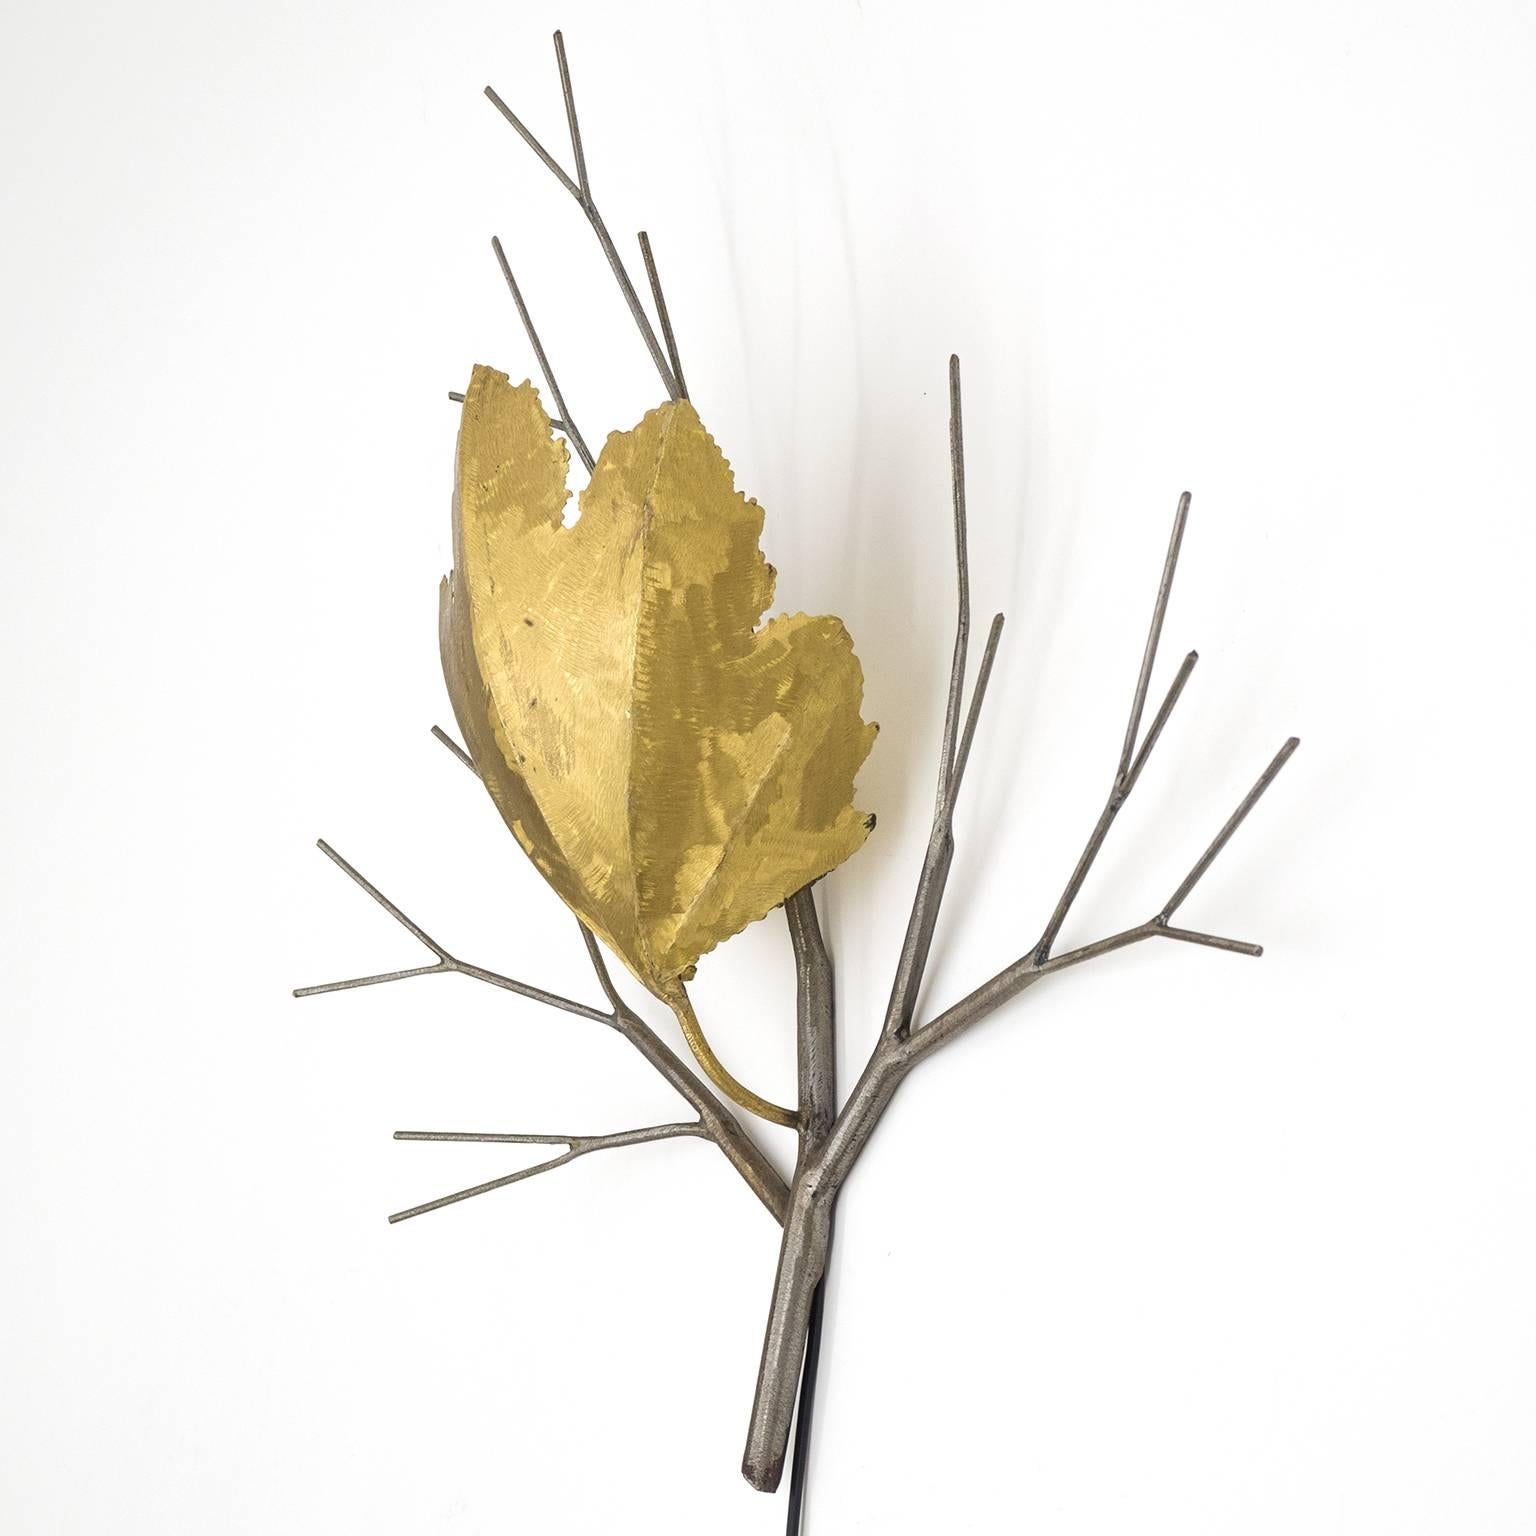 Rare large French brass and steel wall light, circa 1970. A stylized steel branch with a large torch-cut brass leaf which envelopes around a single brass and ceramic E14 socket with new wiring. Very unique design pairing rough surface handling